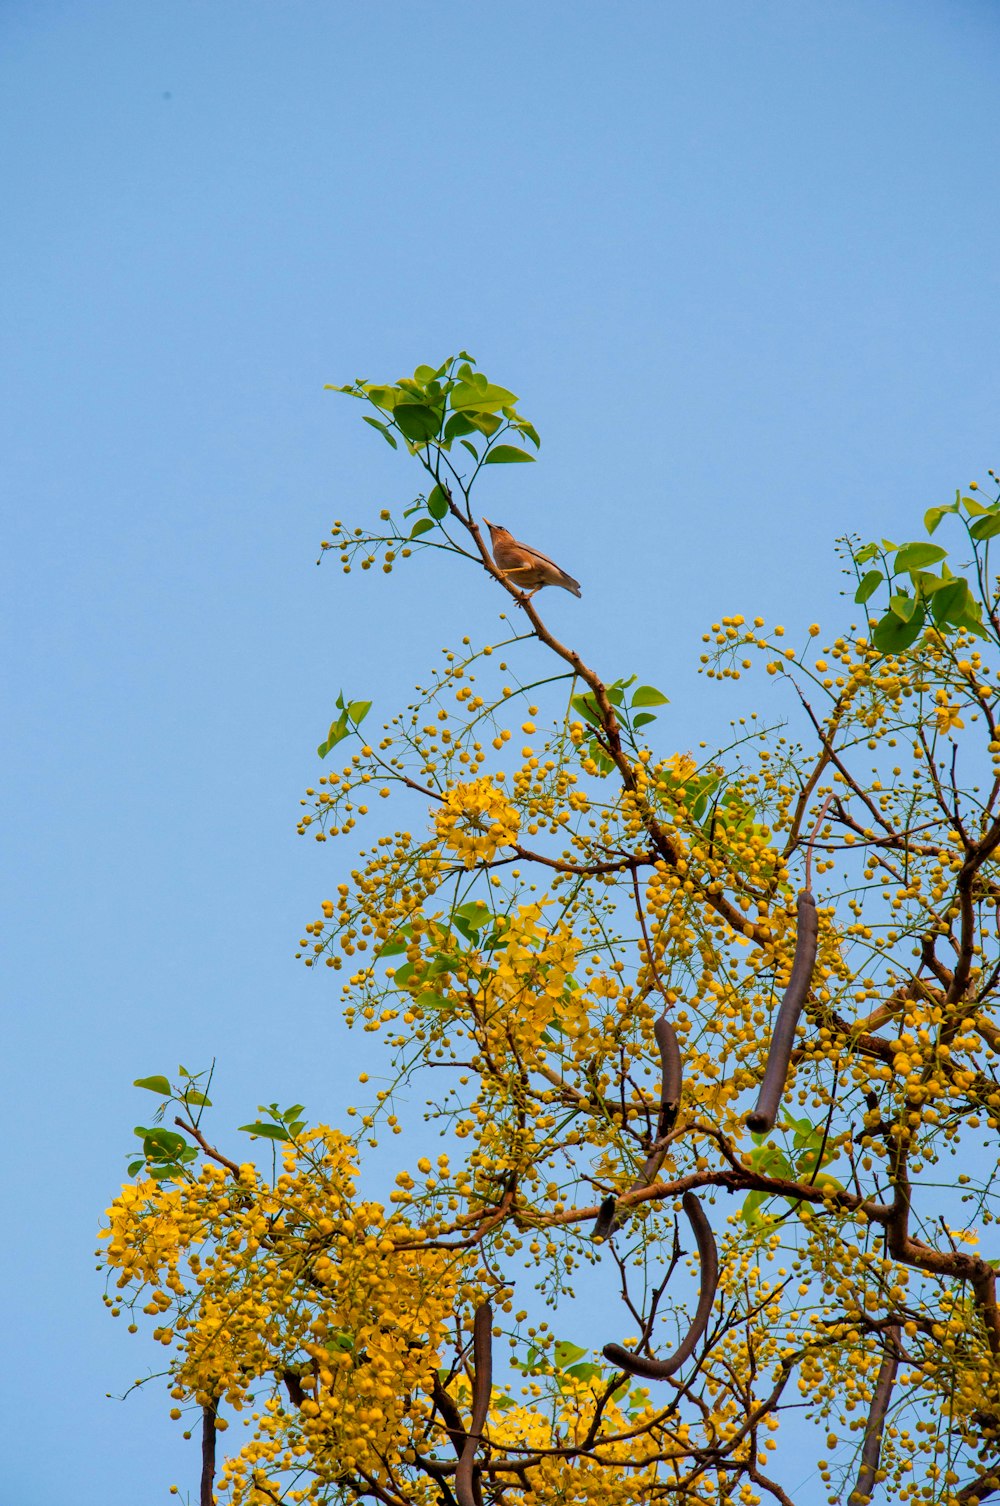 a bird sitting on top of a tree with yellow flowers